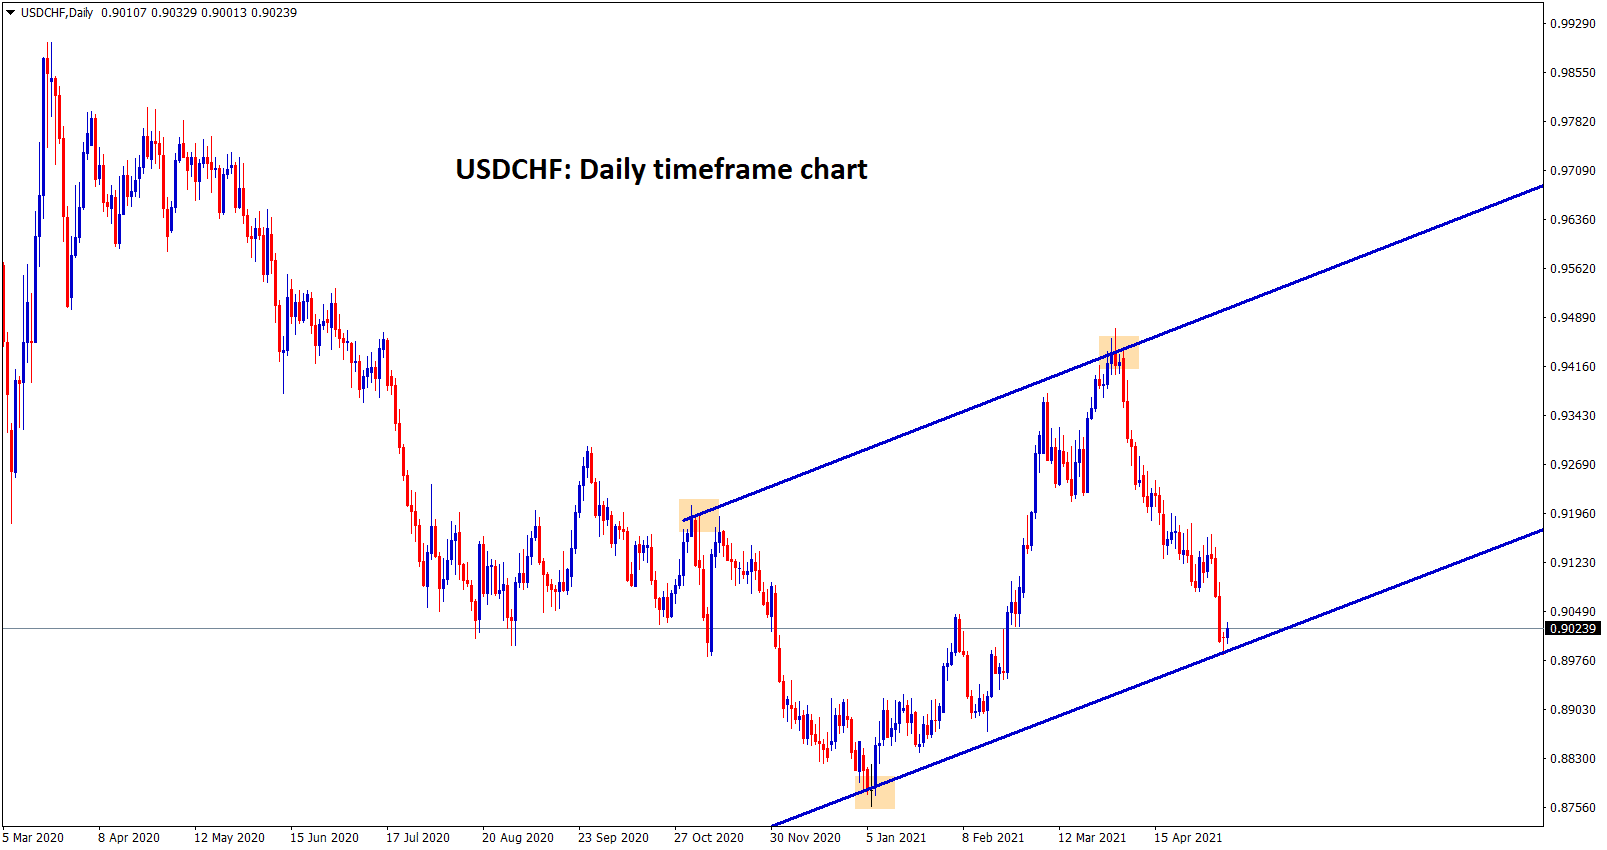 USDCHF at the higher low zone of the range. but it has more chances to fall. however we can expect bounce back